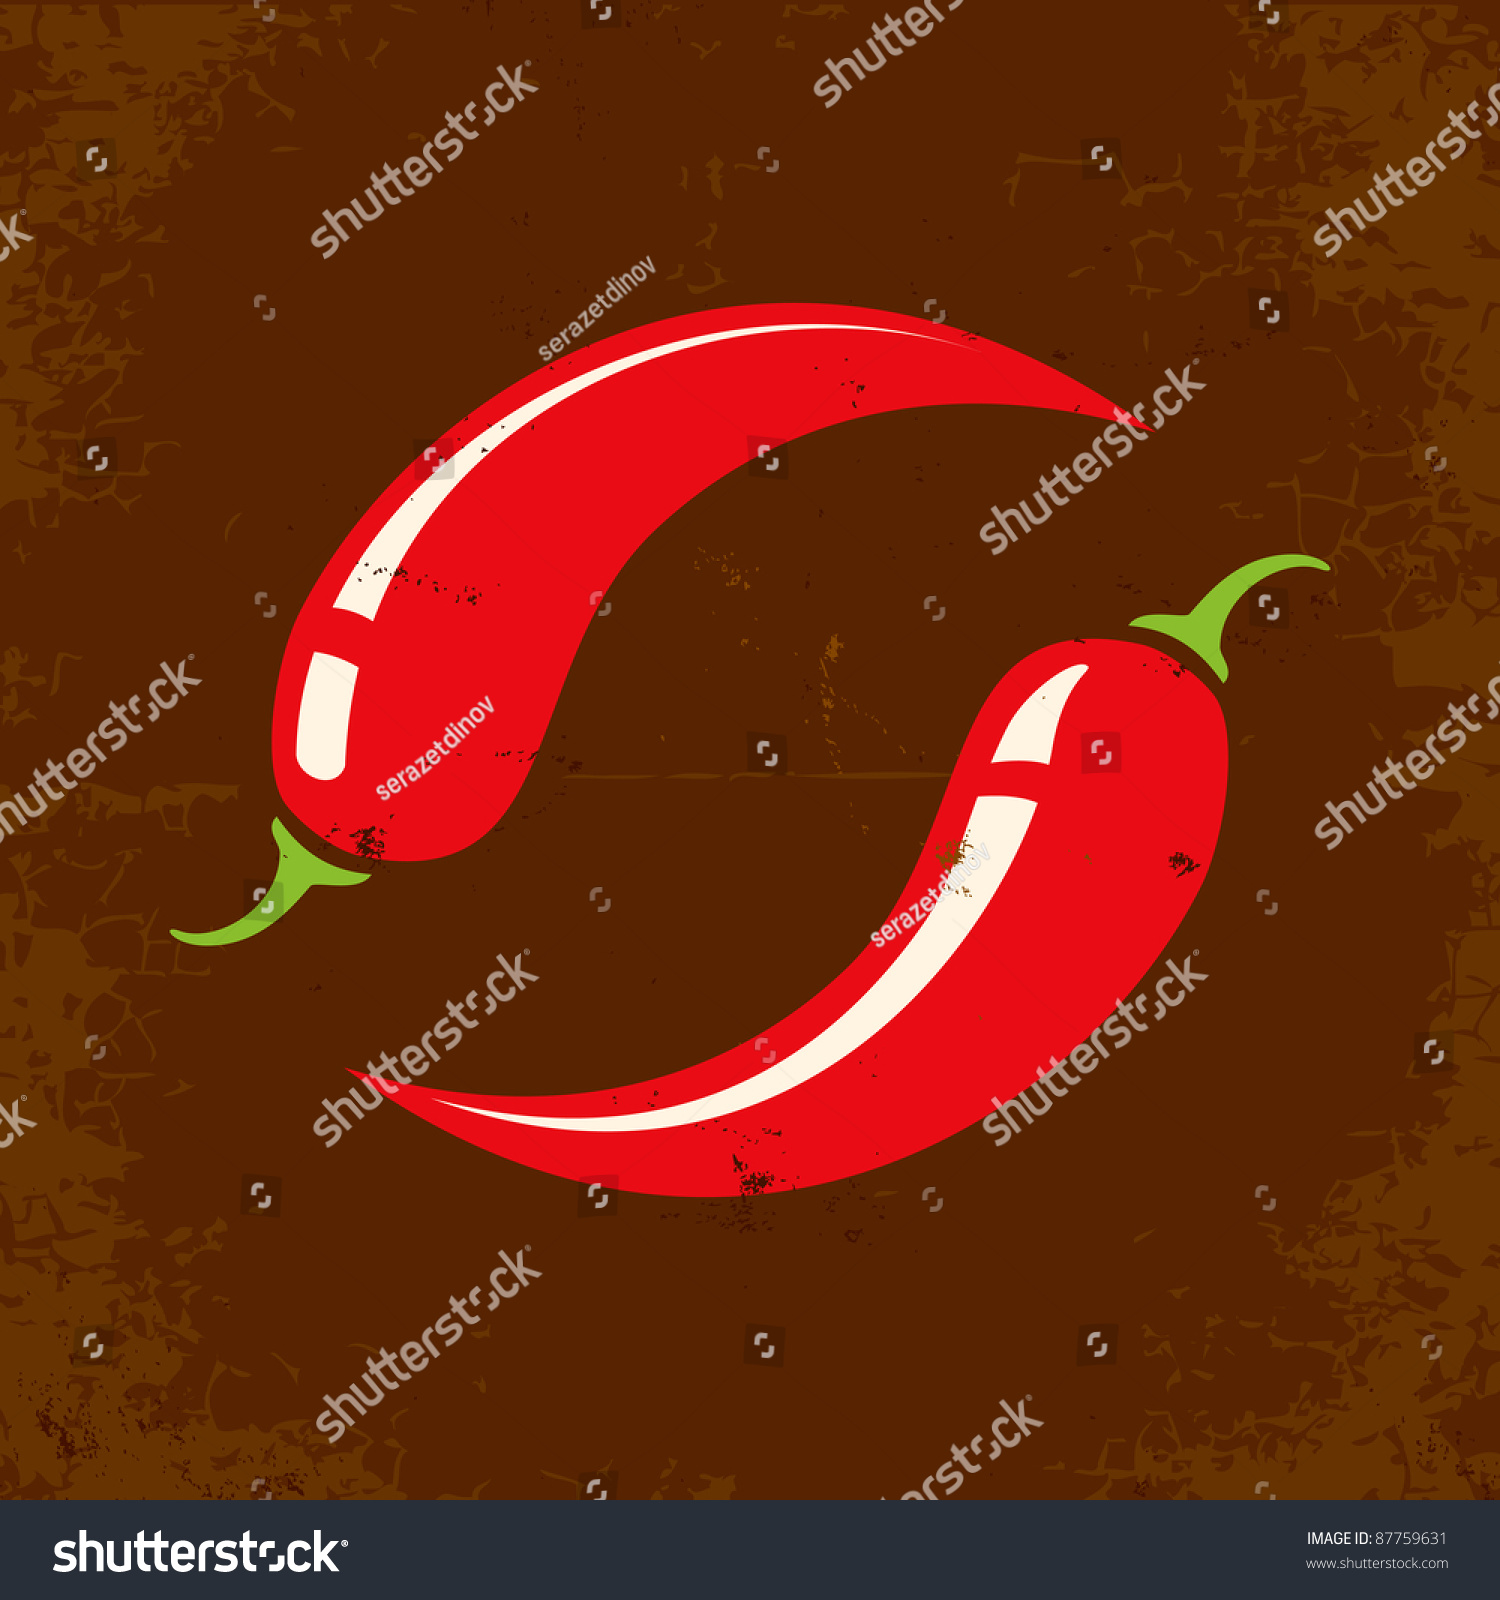 Retro illustration of two chili peppers #87759631